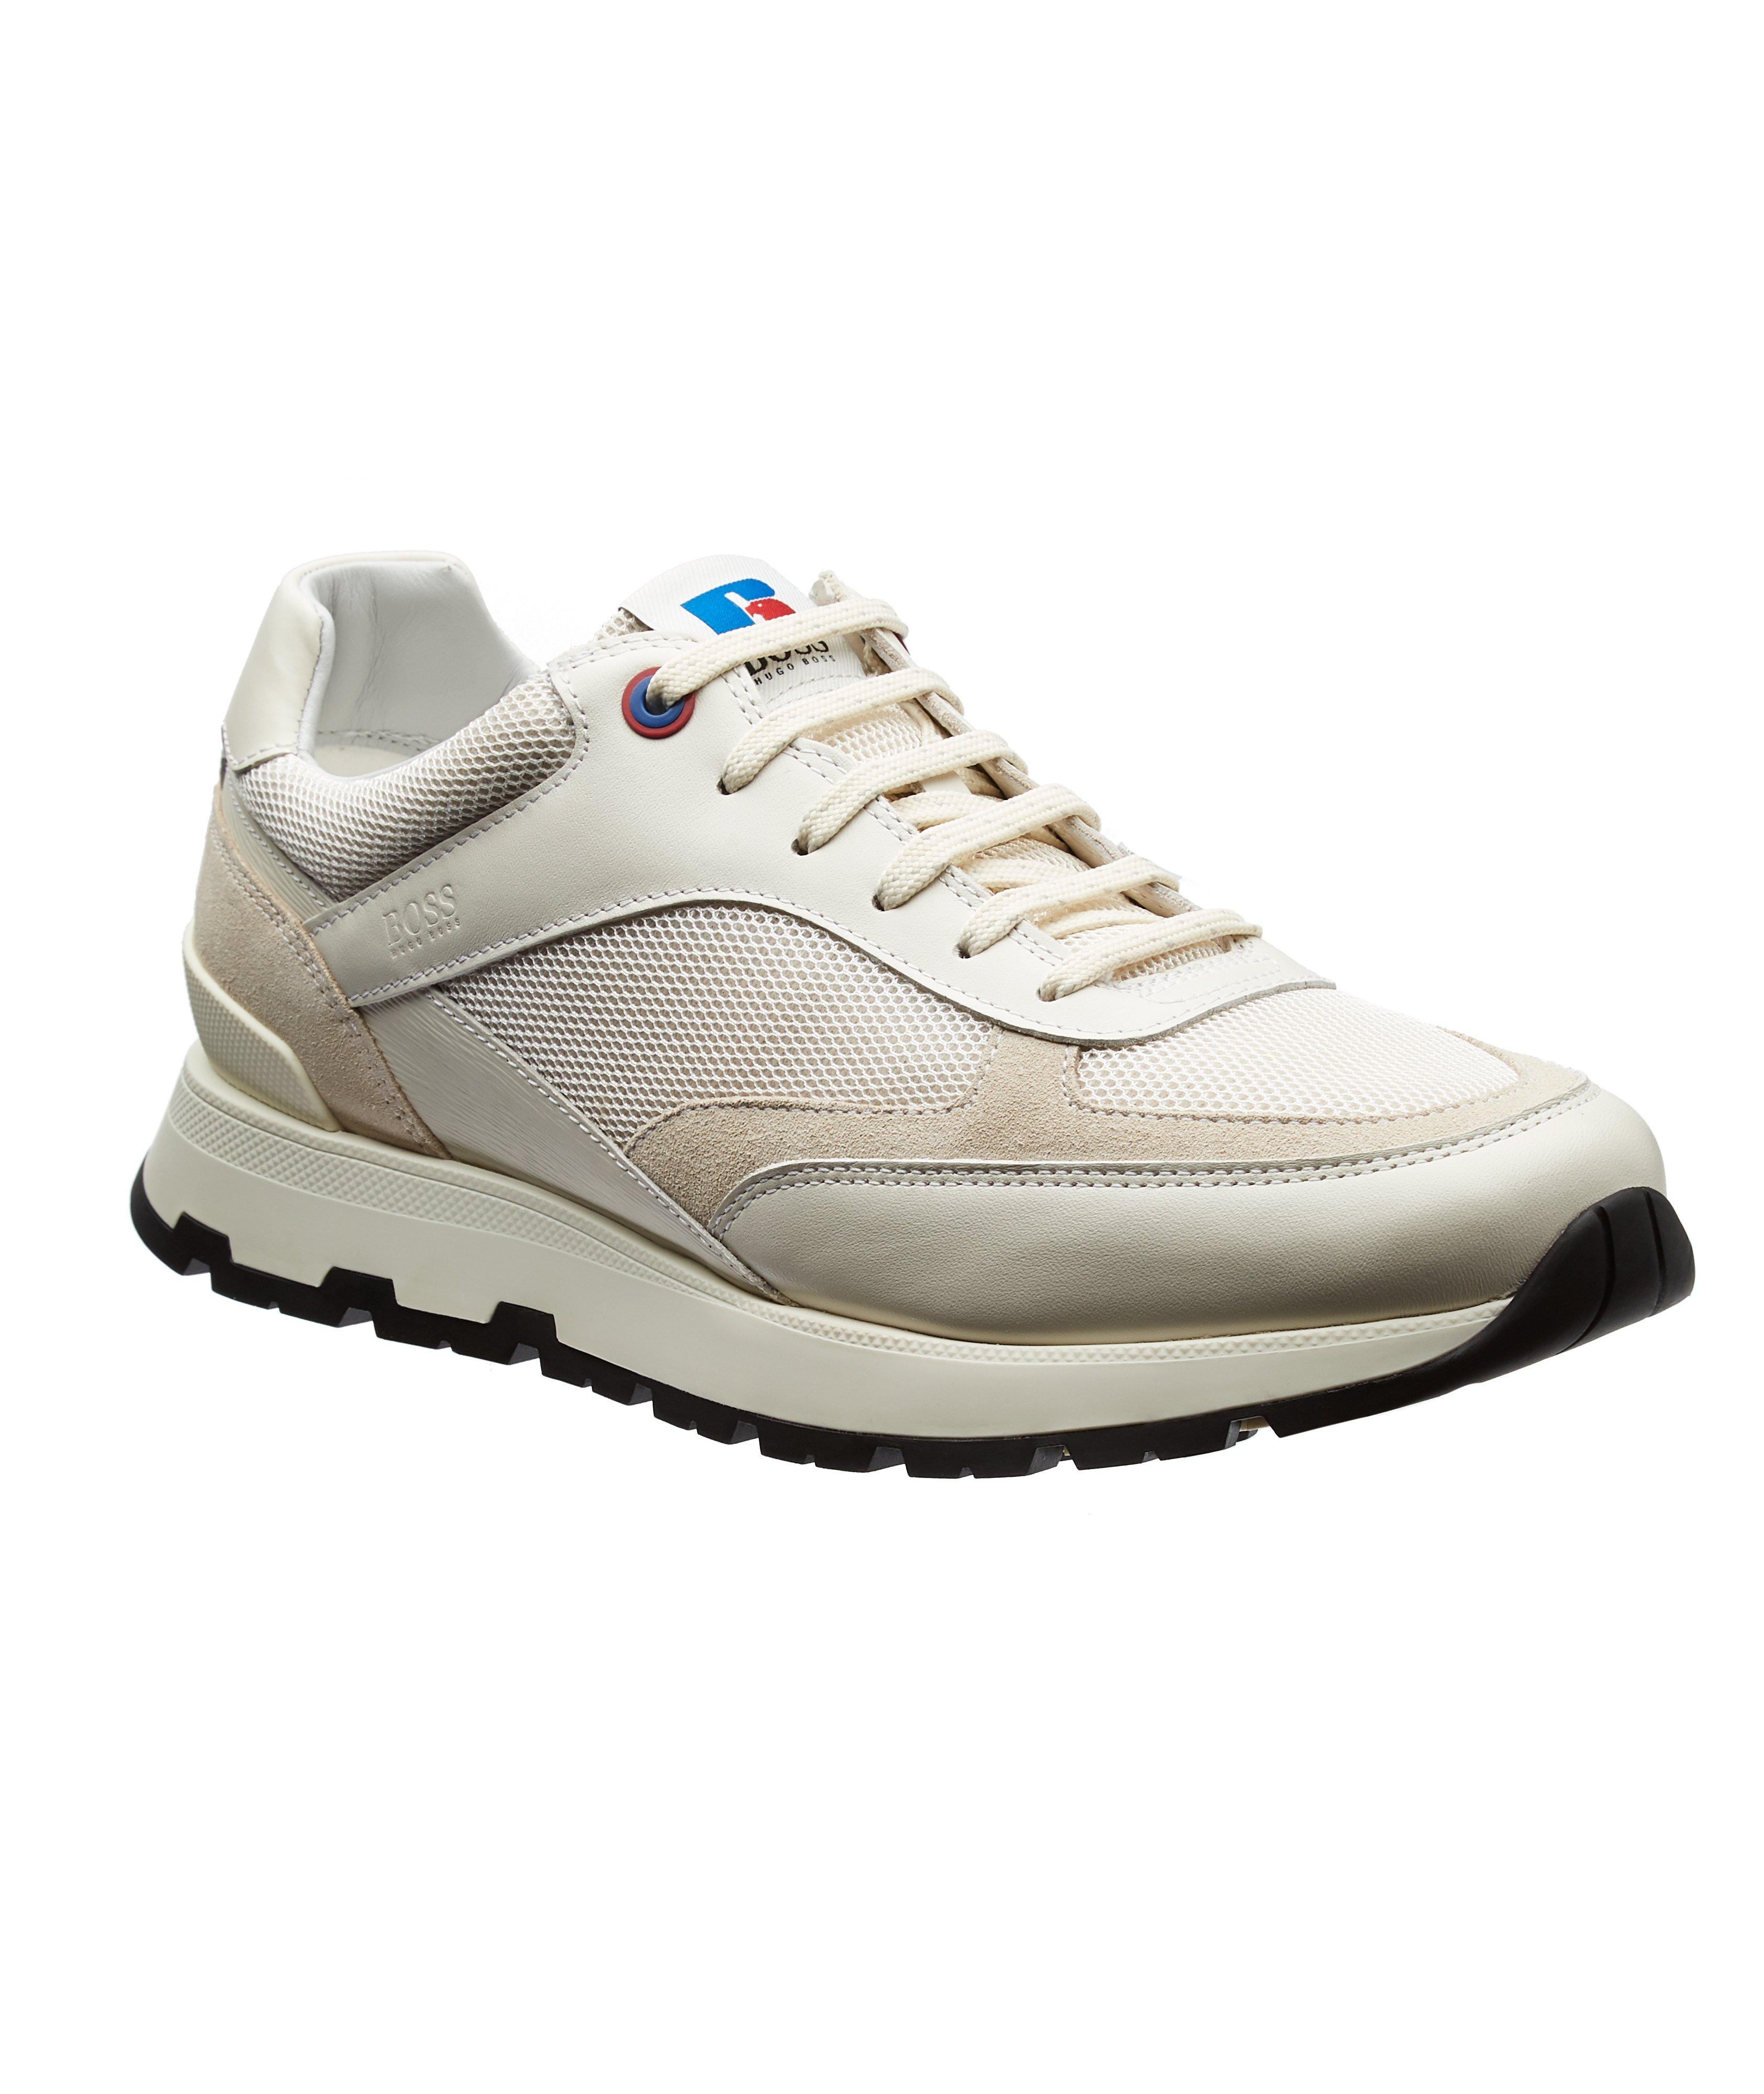 Russell Athletic Arigon Sneakers image 0